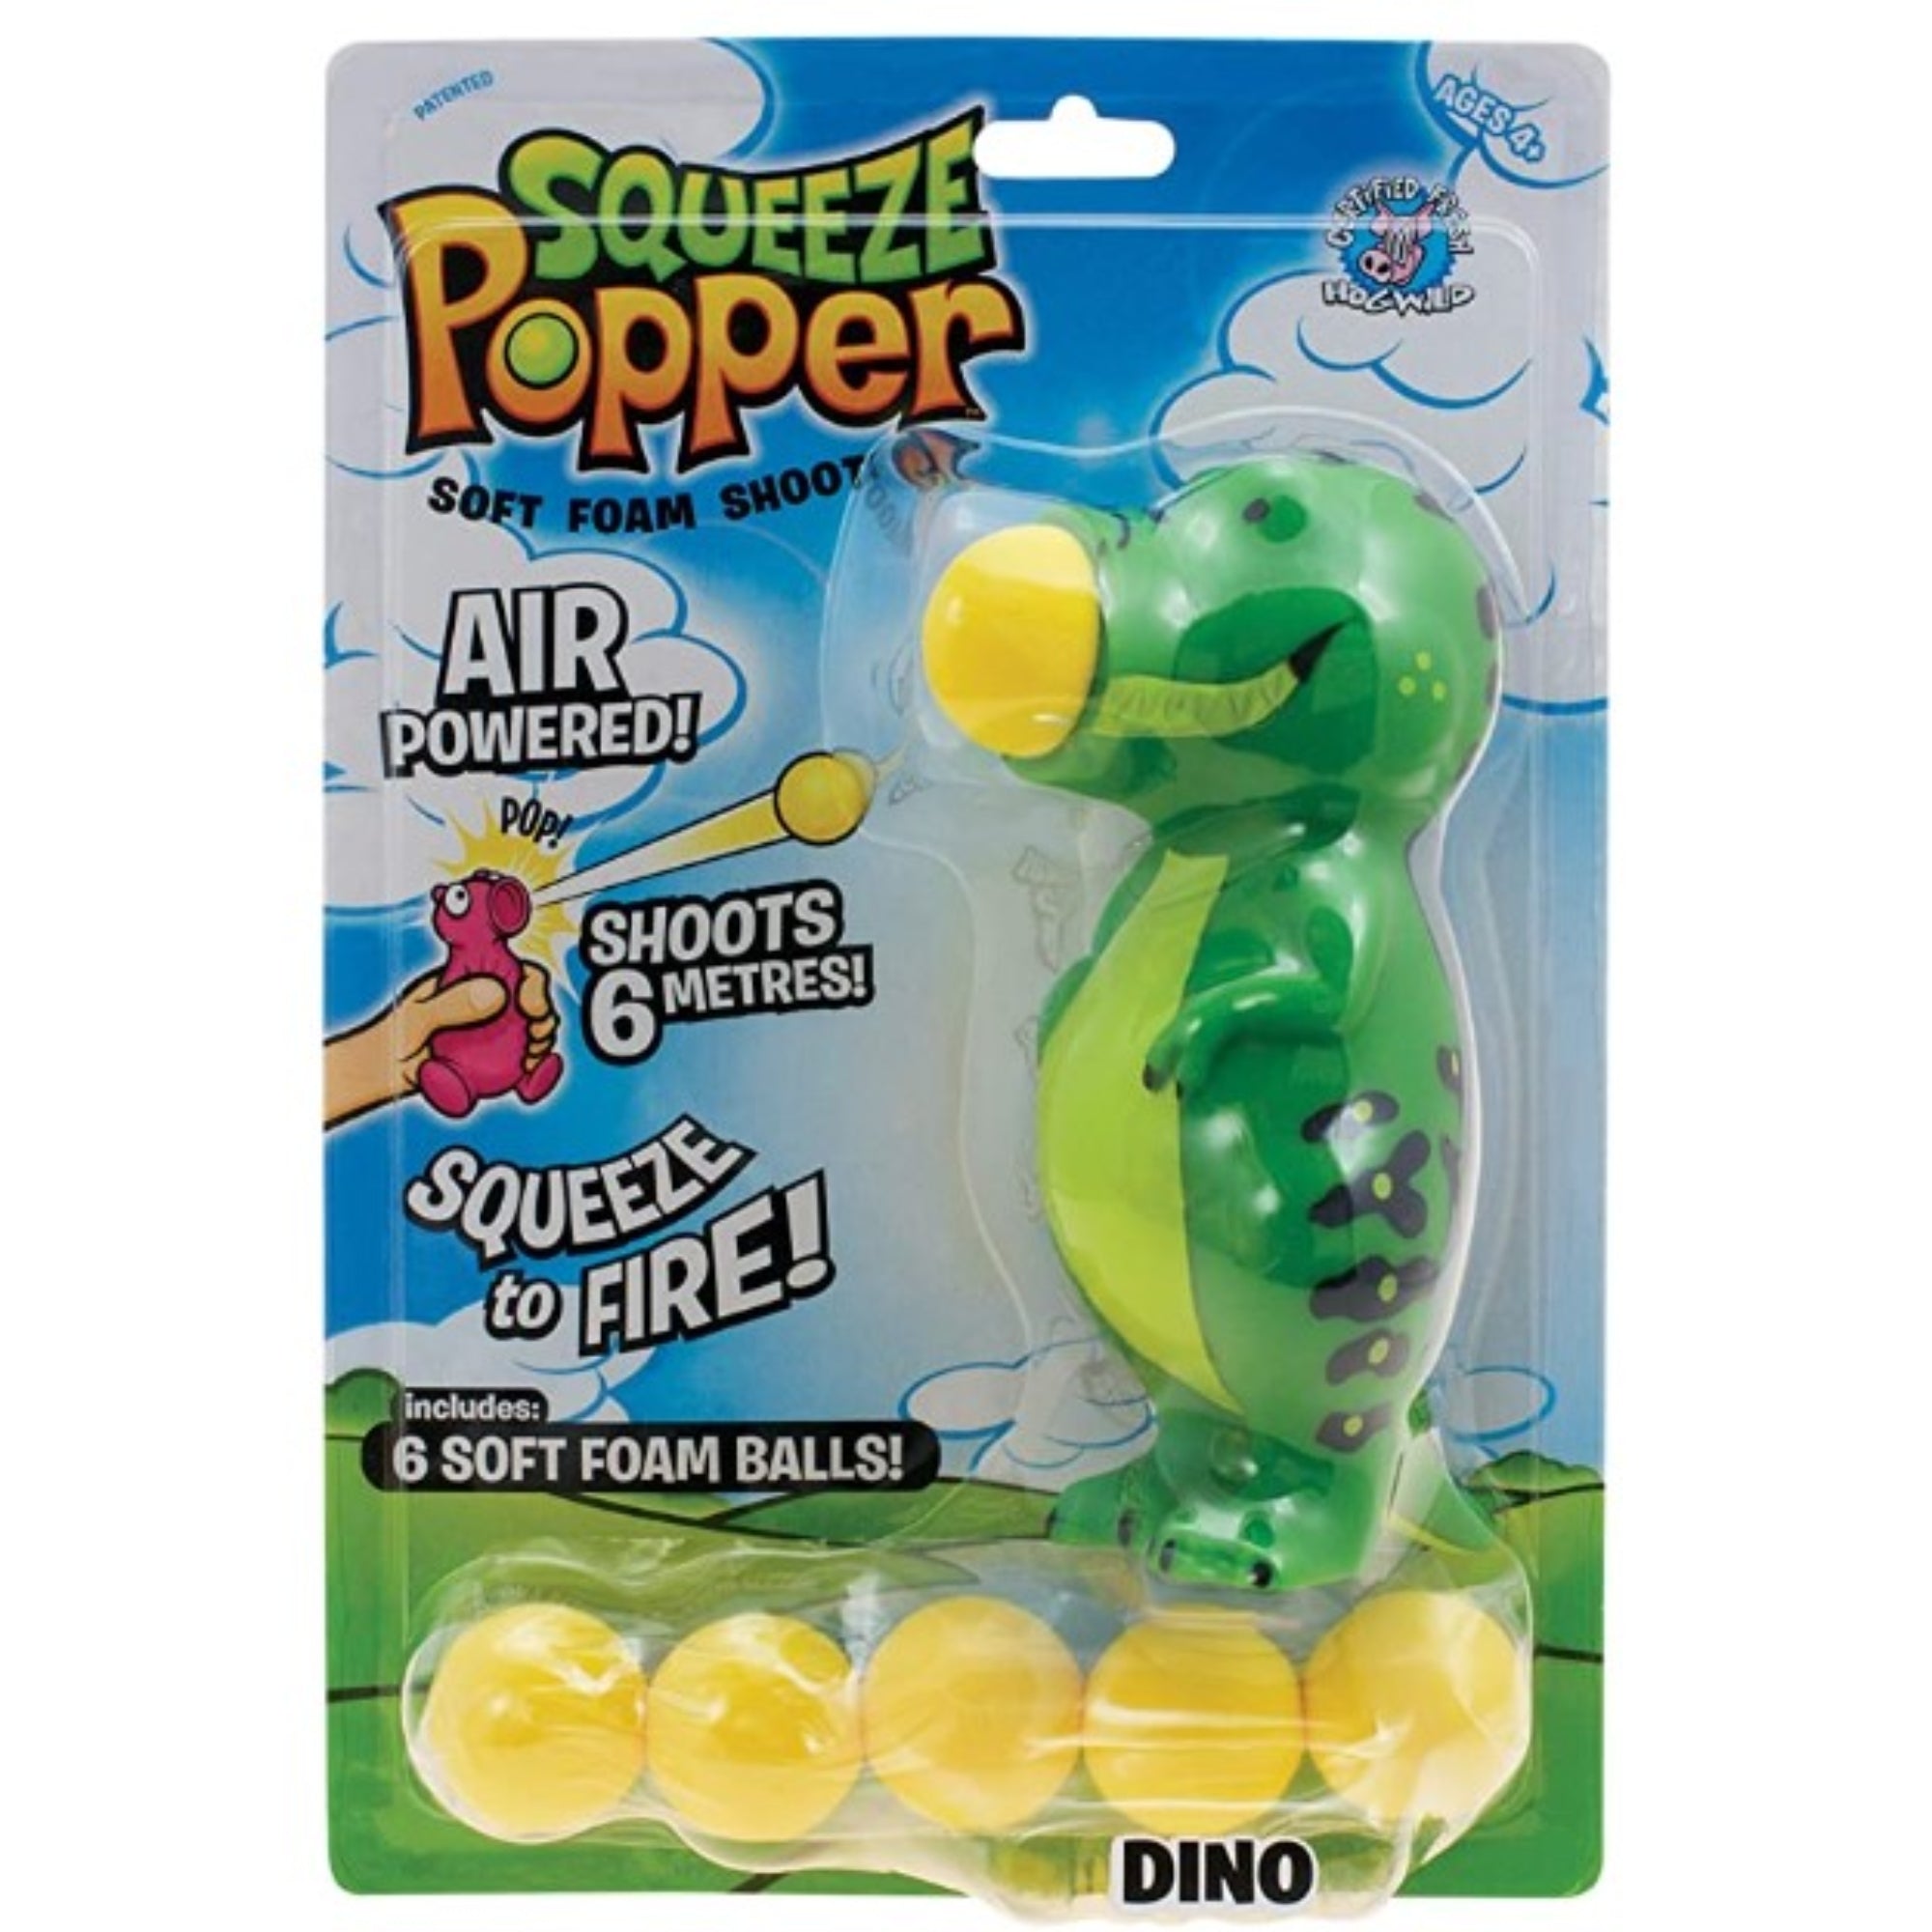 squeeze popper dino package